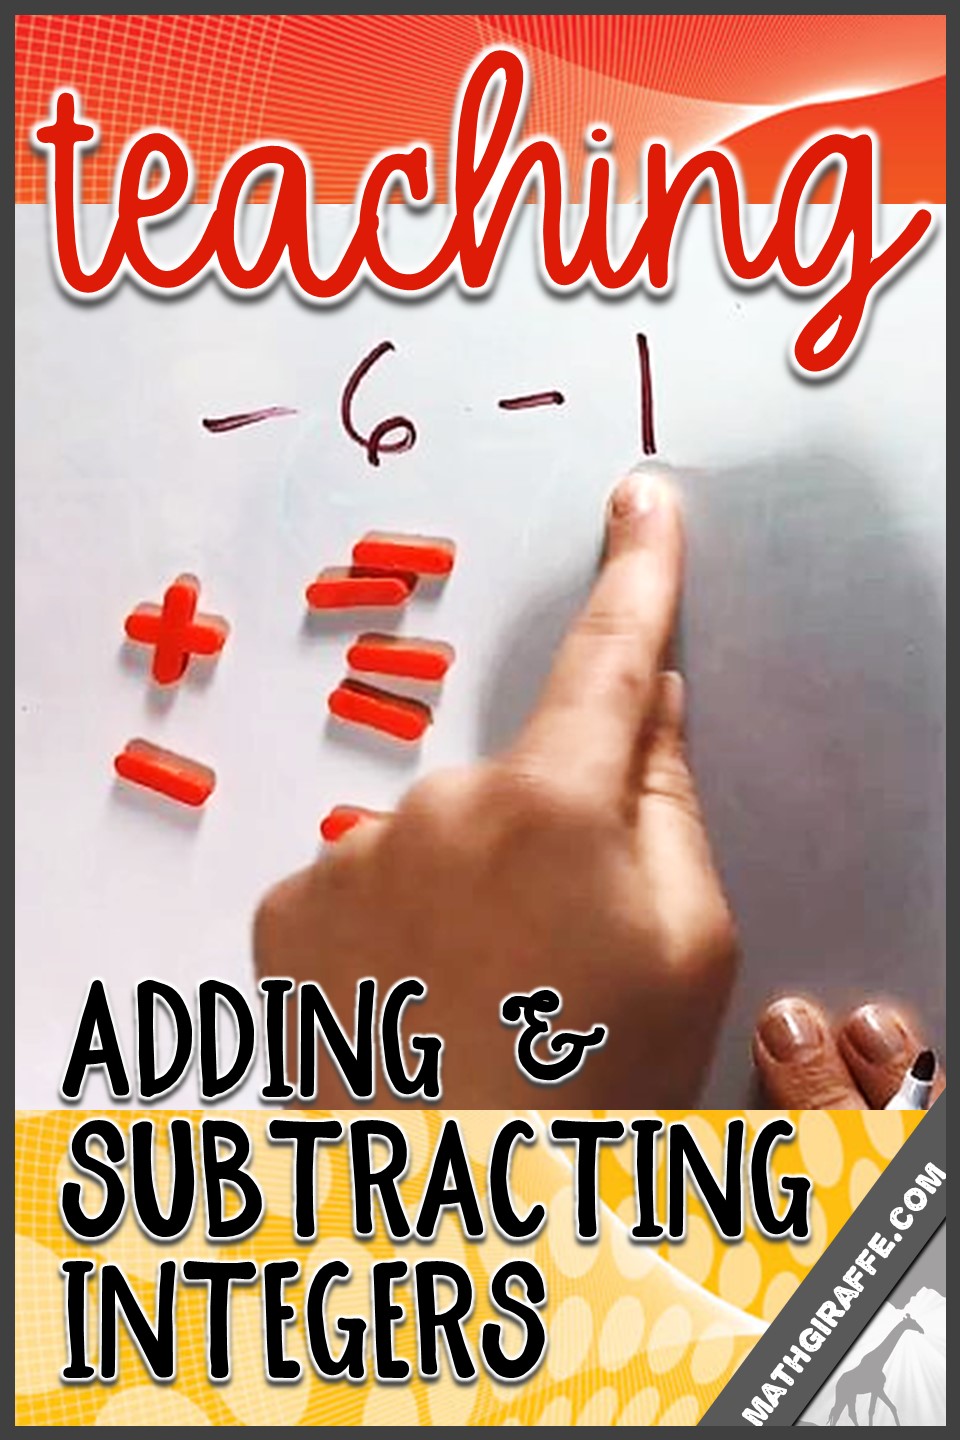 adding and subtracting integers - a guided investigation approach